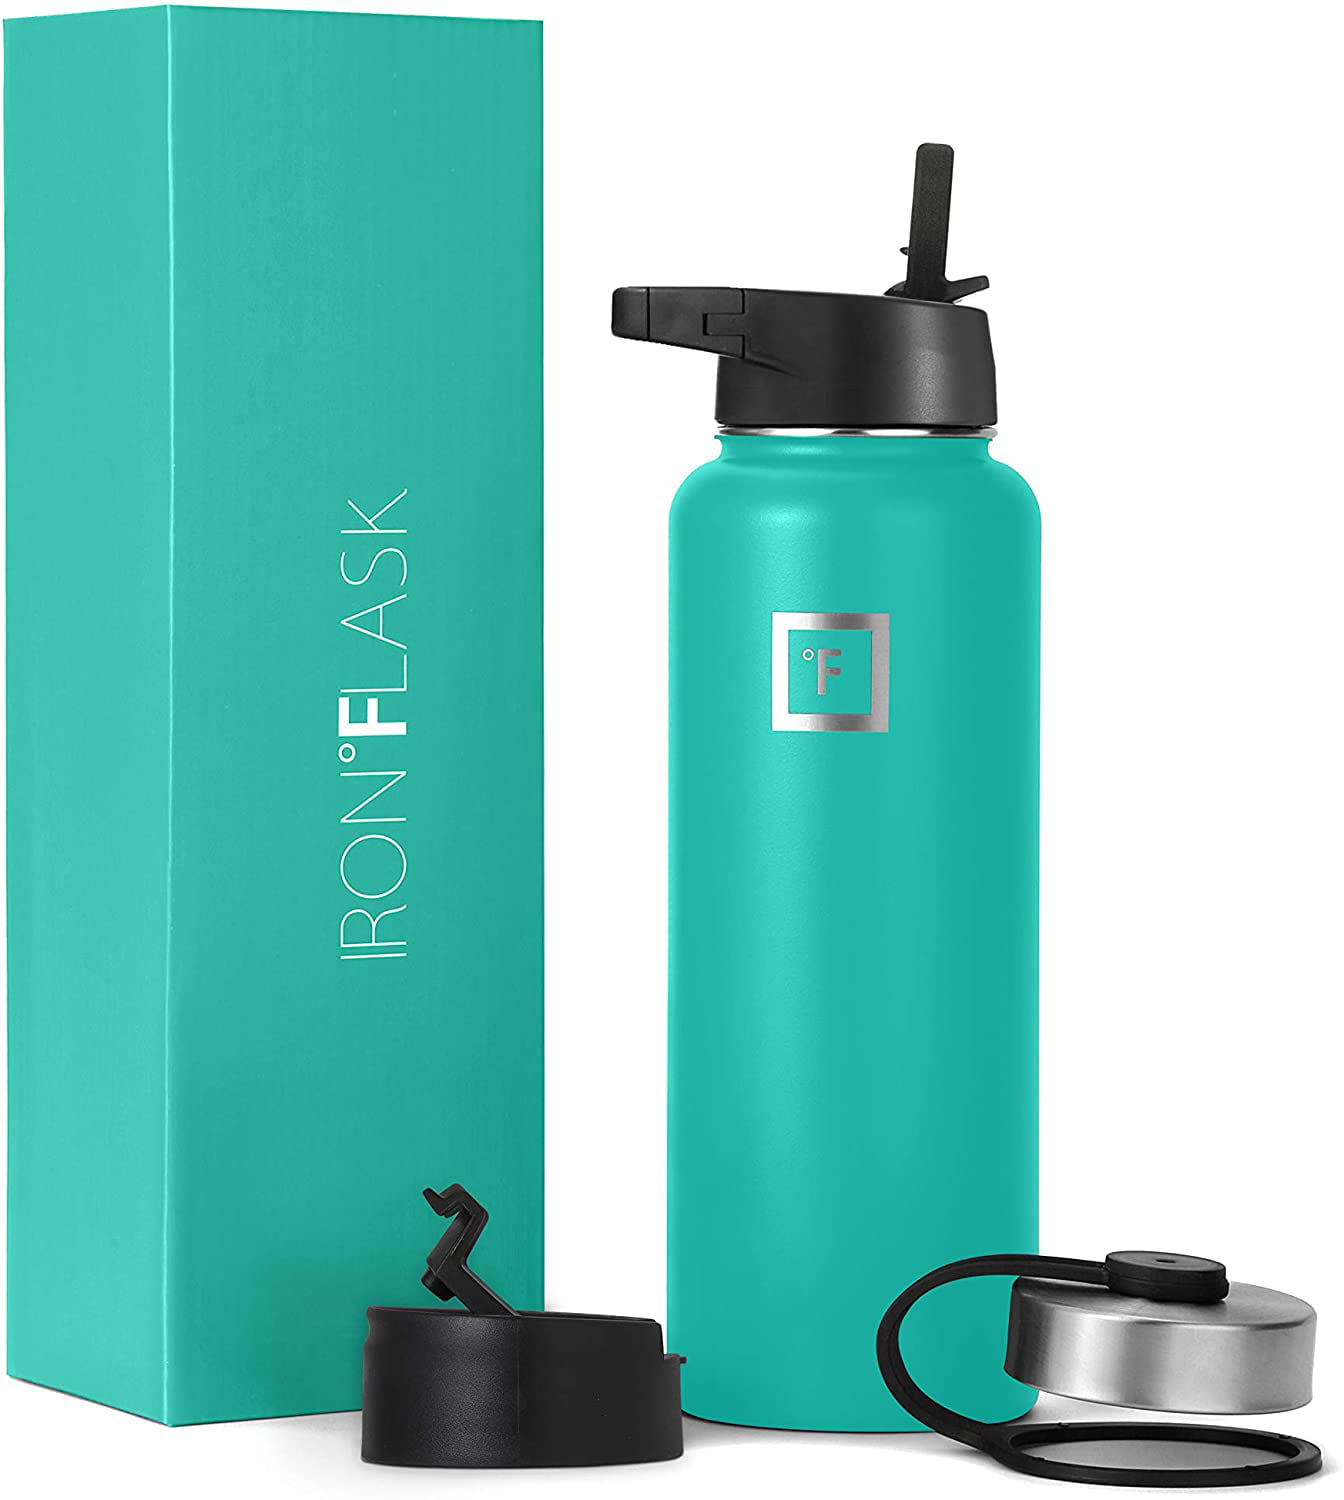 Zero Degree Stainless Steel Water Bottle with Leak Proof Lid 40oz Blue Vacuum Insulated Double Wall Sport Bottle Keeps Drinks Cold for 24 Hours